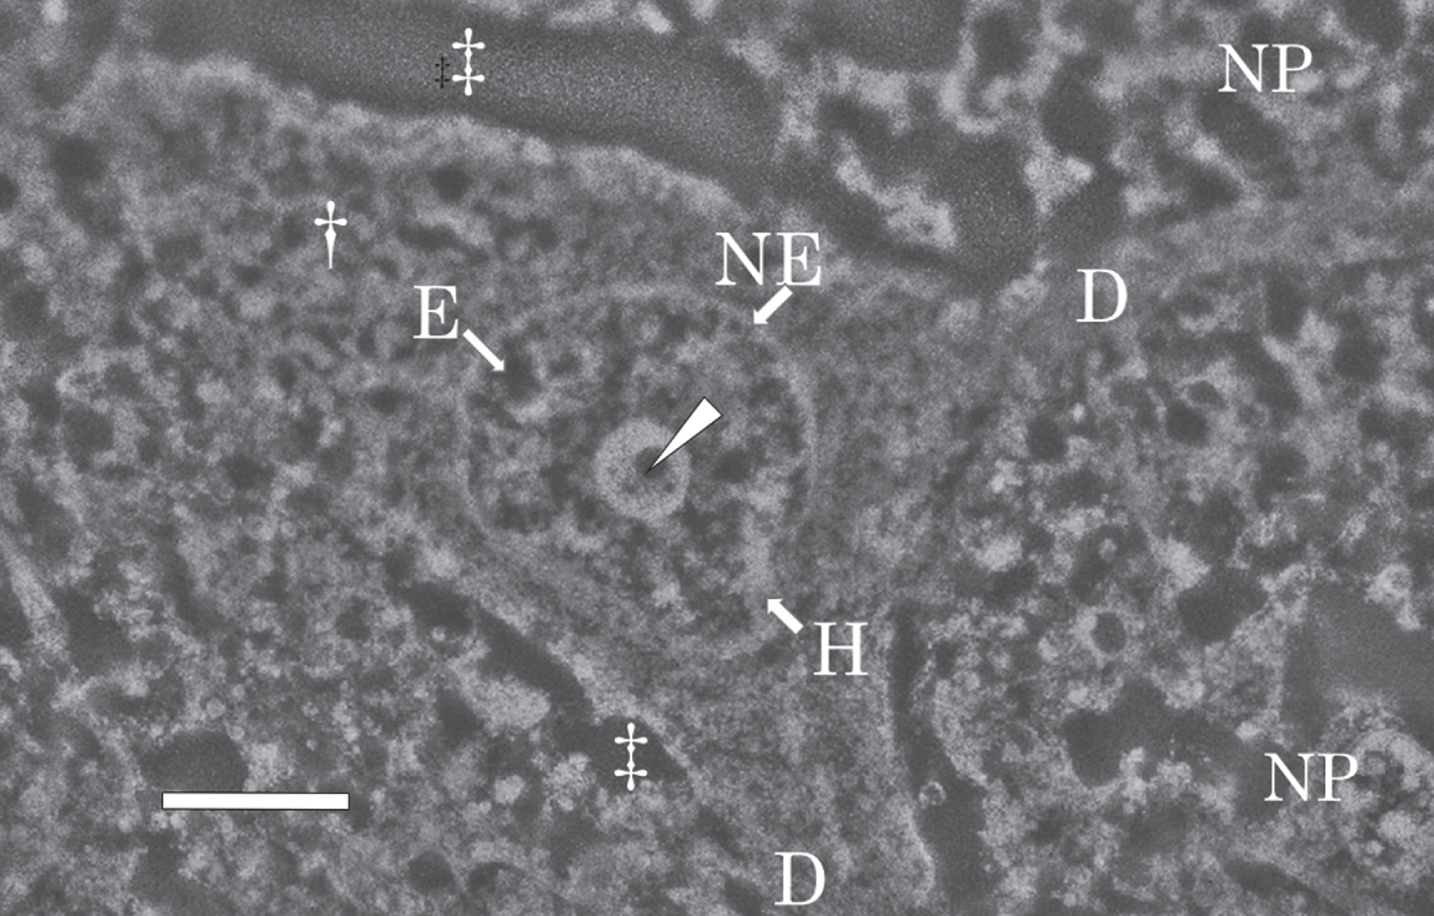 SEM micrograph of a nerve cell in the temporal cortex of the AD brain. The SEM micrograph shows a nerve cell of the AD brain fixed with potassium dichromate and stained with ammonium molybdate. The nuclear envelope (NE) shows an intact shape. Intranuclear structures such as the nucleolus, heterochromatin (H, bright region), and euchromatin (E, dark region) are well preserved. In the center of the nucleolus, pars amorpha (arrowhead) is clearly observed. Two dendrites (D) branches from the cytoplasm (dagger) of the nerve cell. Due to postmortem changes, the extracellular space (double dagger) is enlarged. NP, neuropil. Scale bar, 2μm.